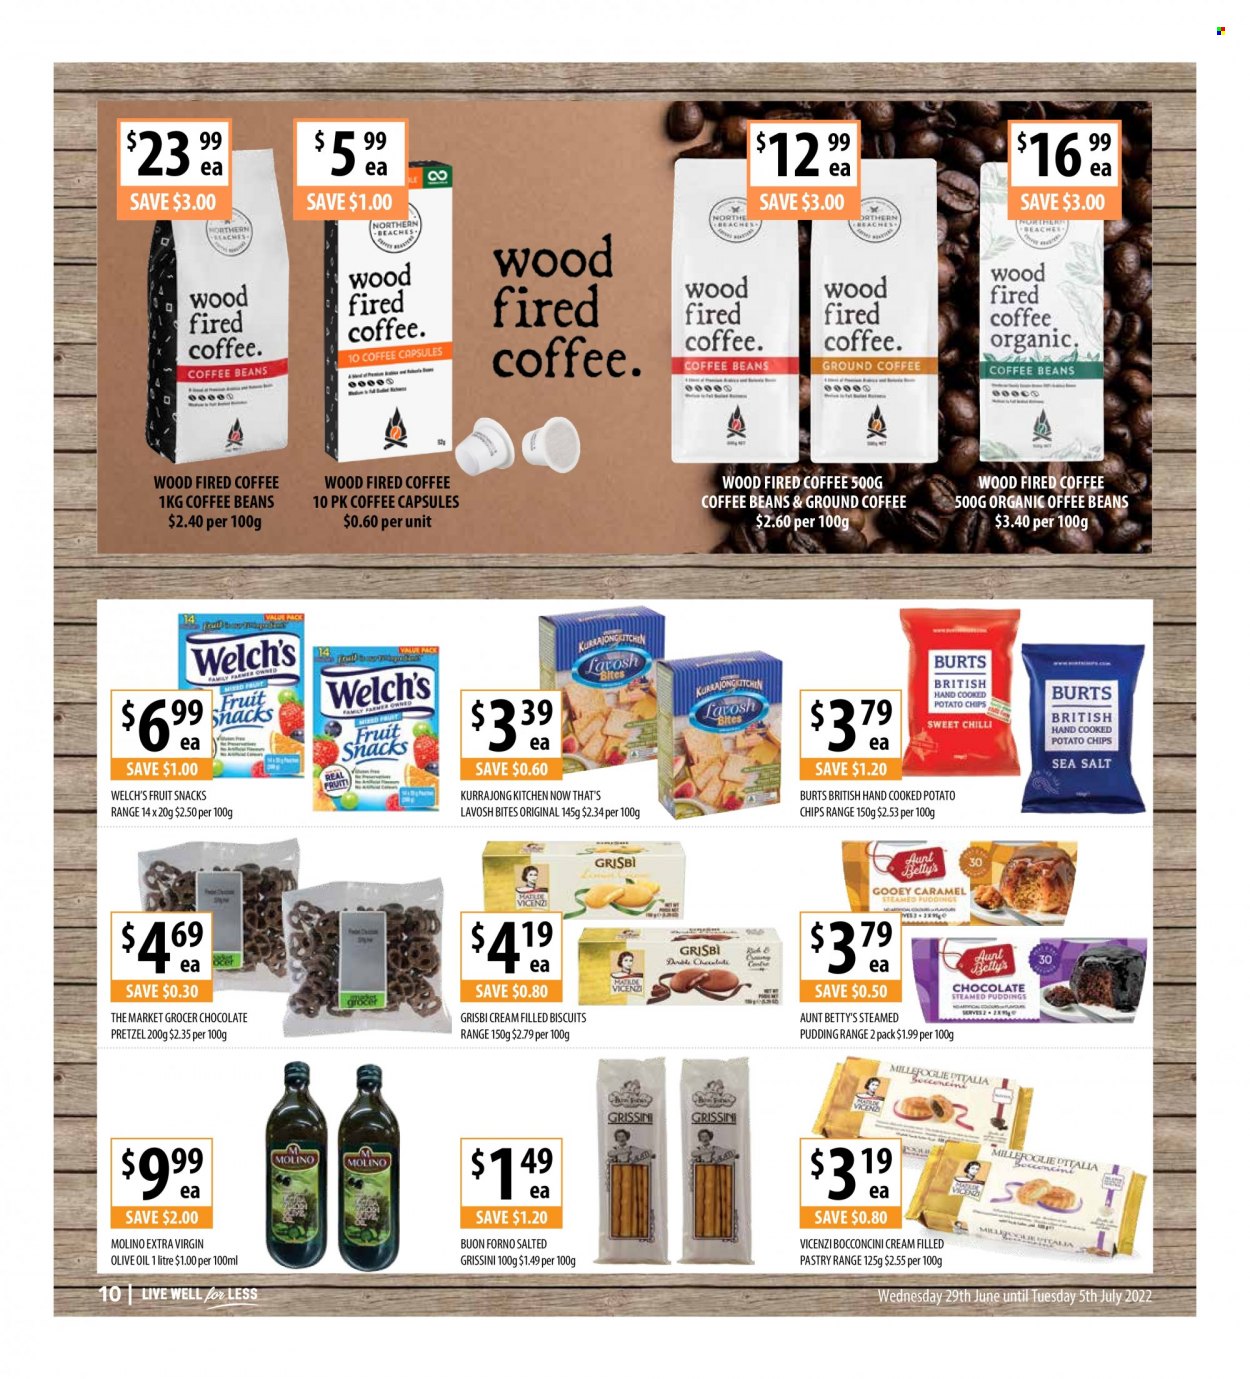 thumbnail - Supabarn Catalogue - 29 Jun 2022 - 5 Jul 2022 - Sales products - pretzels, Welch's, bocconcini, pudding, chocolate, biscuit, fruit snack, potato chips, chips, grissini, extra virgin olive oil, olive oil, oil, coffee beans, ground coffee, coffee capsules. Page 10.